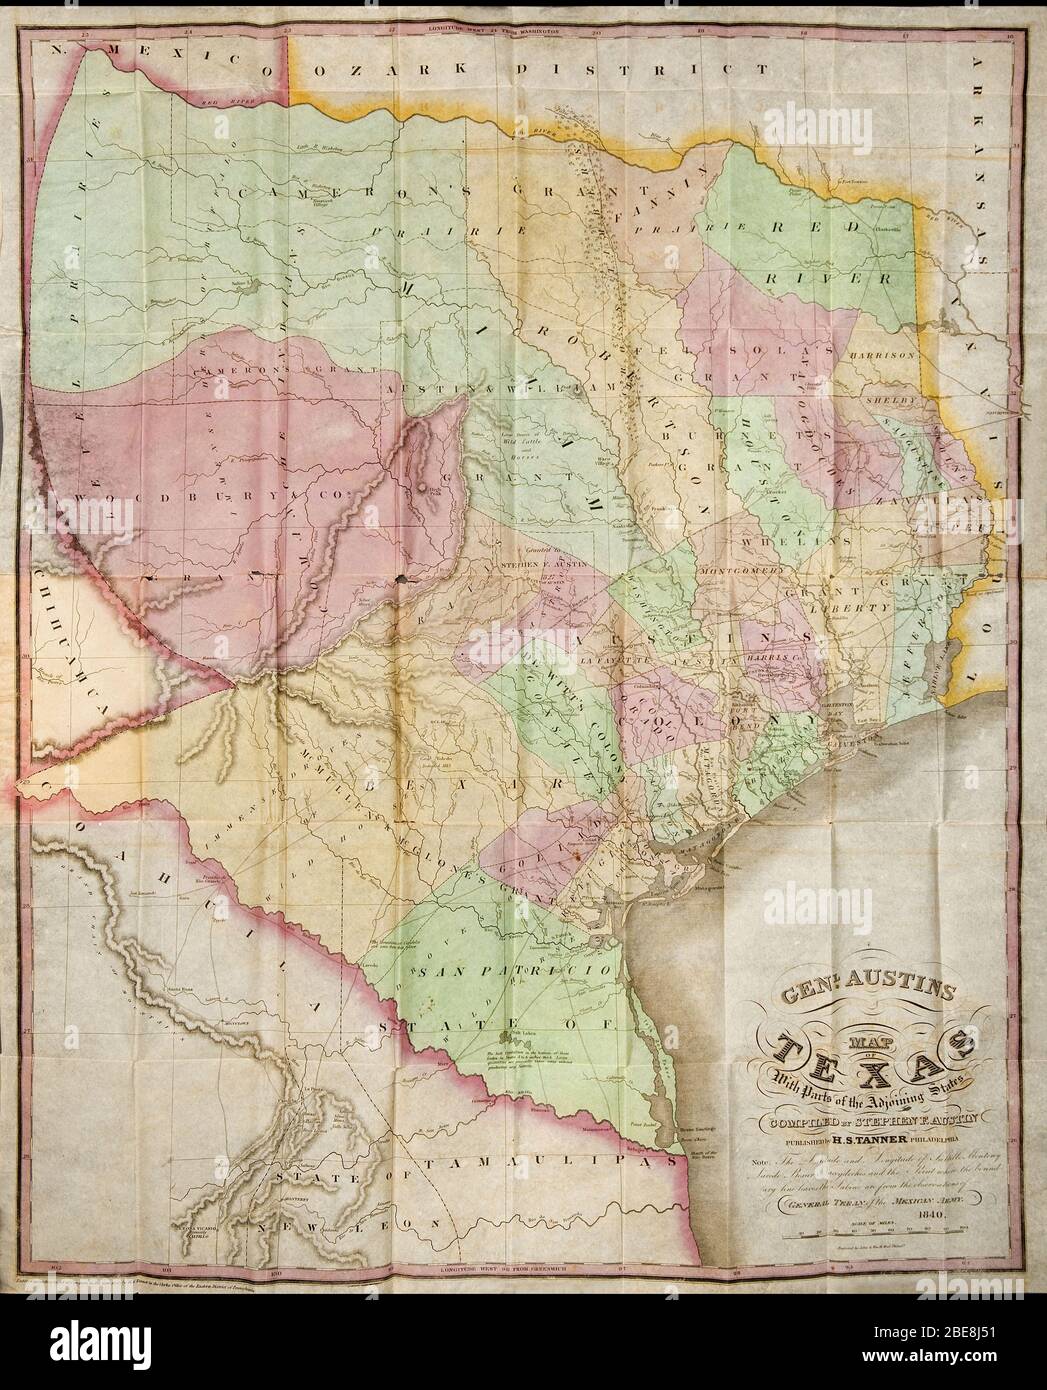 'Large color folding map titled: Genl. Austin's Map of Texas with Parts of the Adjoining States, compiled by Stephen F. Austin. Published by H.S. Tanner, Philadelphia. Engraved by John & Wm. W. Warr, Philad. (29.5 x 23.5).  Included in the book Map and Description of Texas, containing Sketches of its History, Geology, Geography and Statistics: With concise statements, relative to the soil, climate, productions, facilities of transportation, population of the country; and some brief remarks Upon the Character and Customs of its Inhabitants. By Francis Moore, Jr., Editor of the Telegraph and Tex Stock Photo